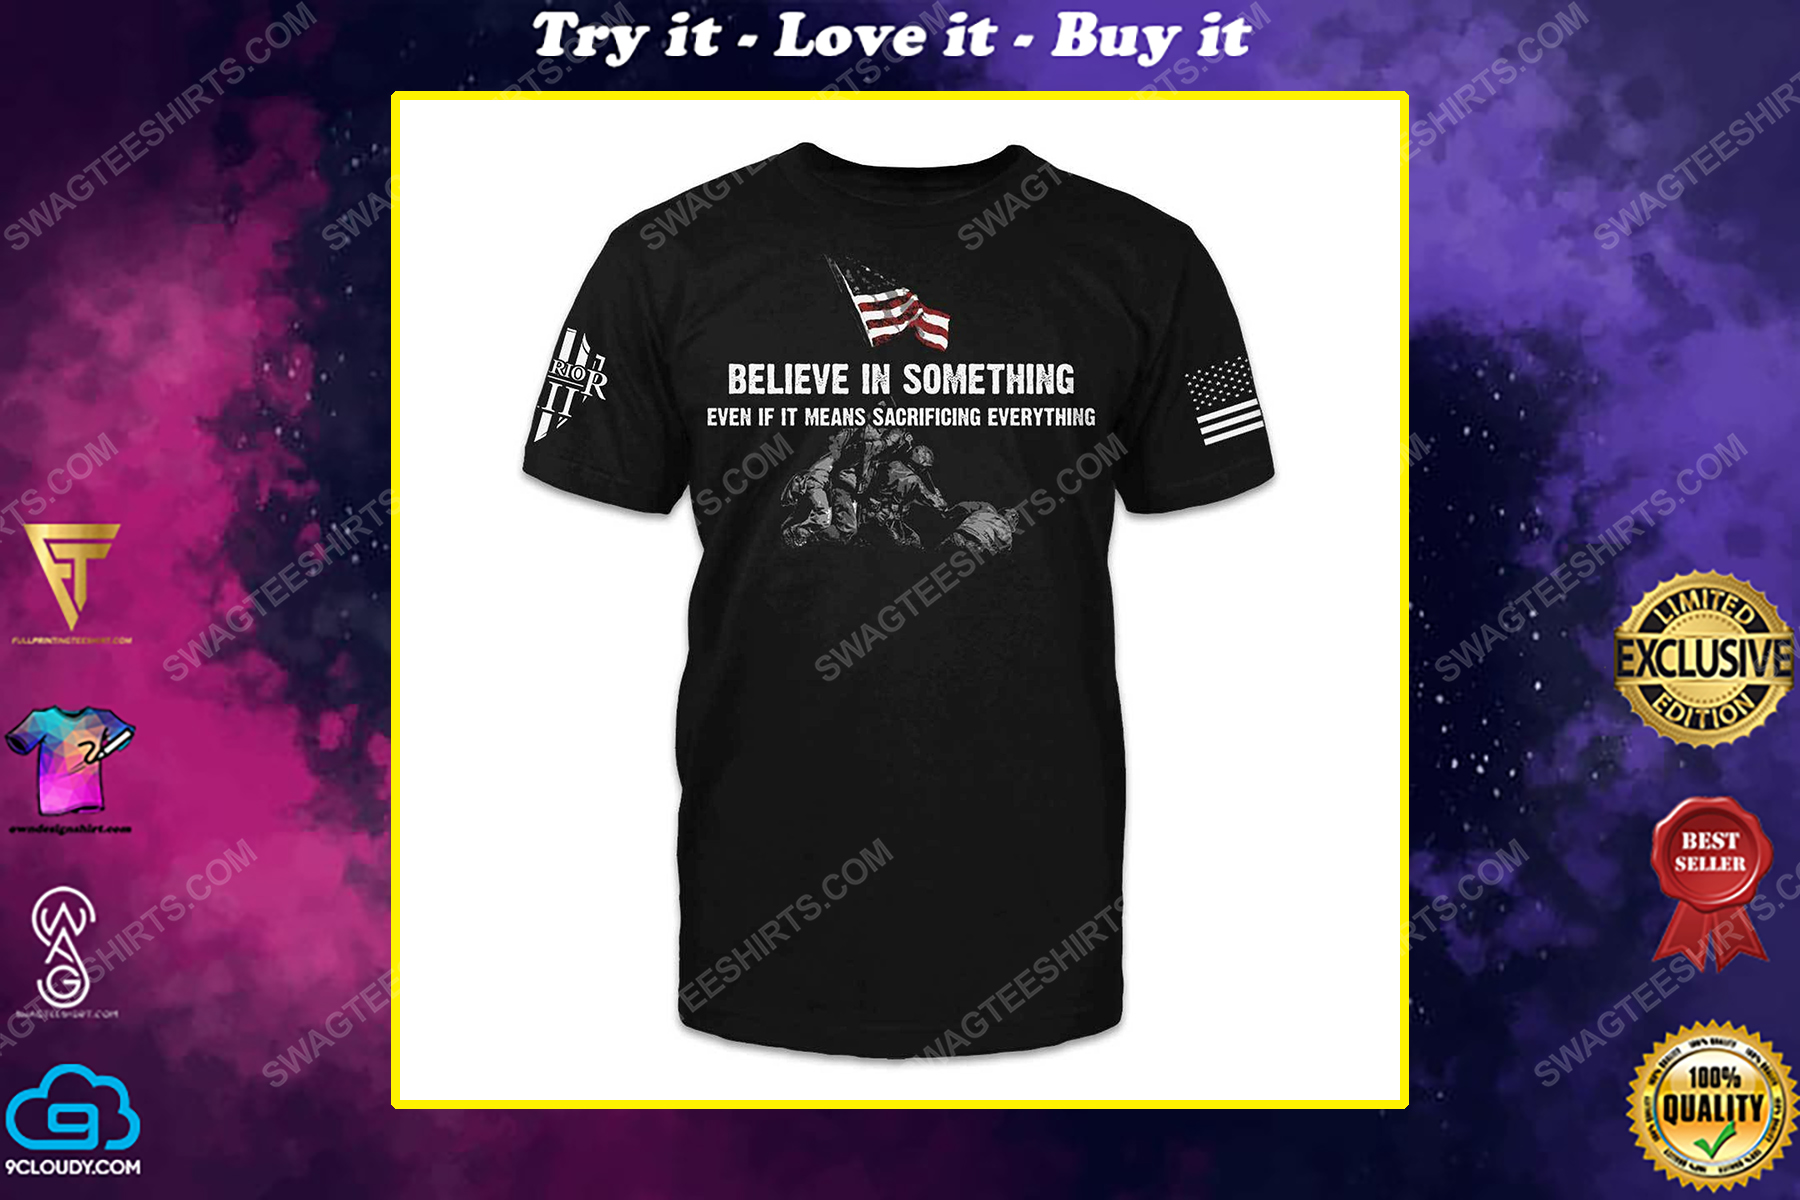 Believe in something even if it means sacrificing everything veteran day shirt